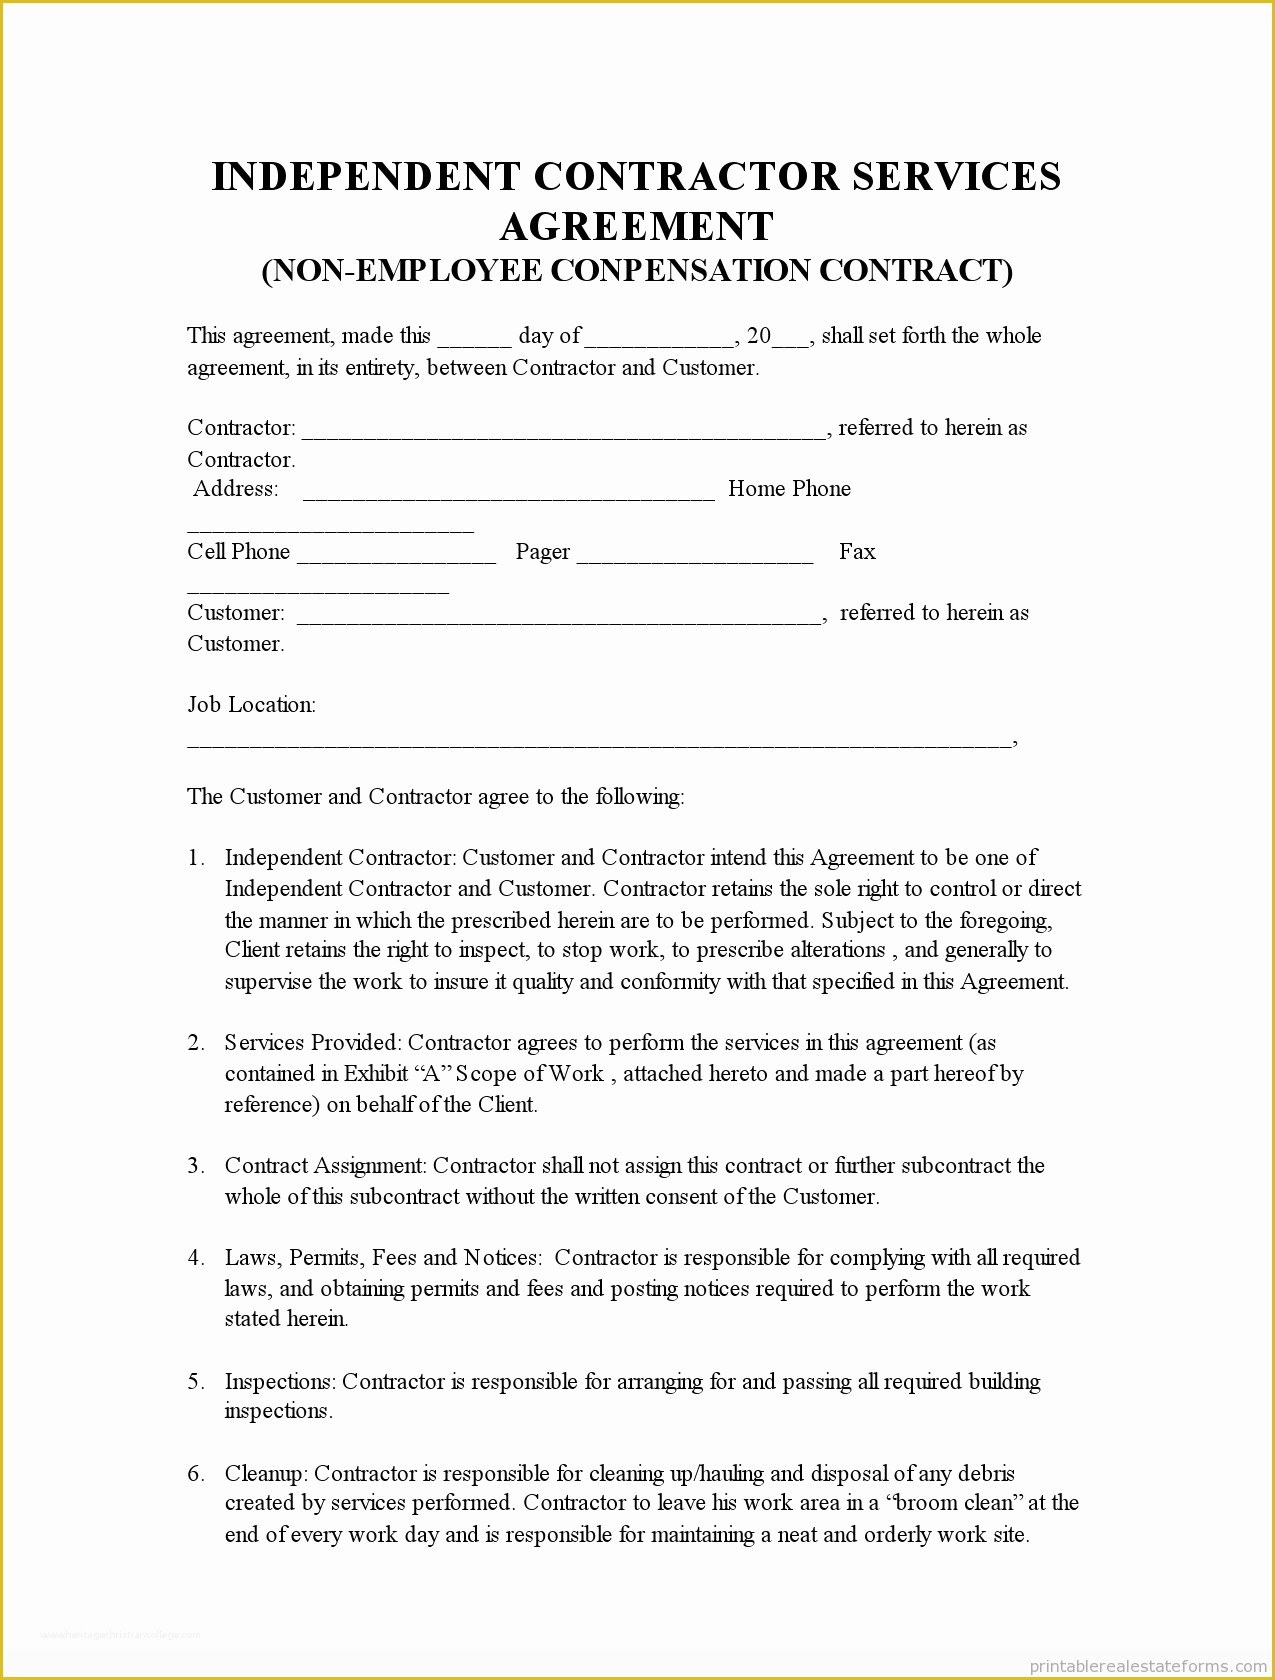 Free Construction Subcontractor Agreement Template Of Sample Printable Indep Contractor Agreement 2 form